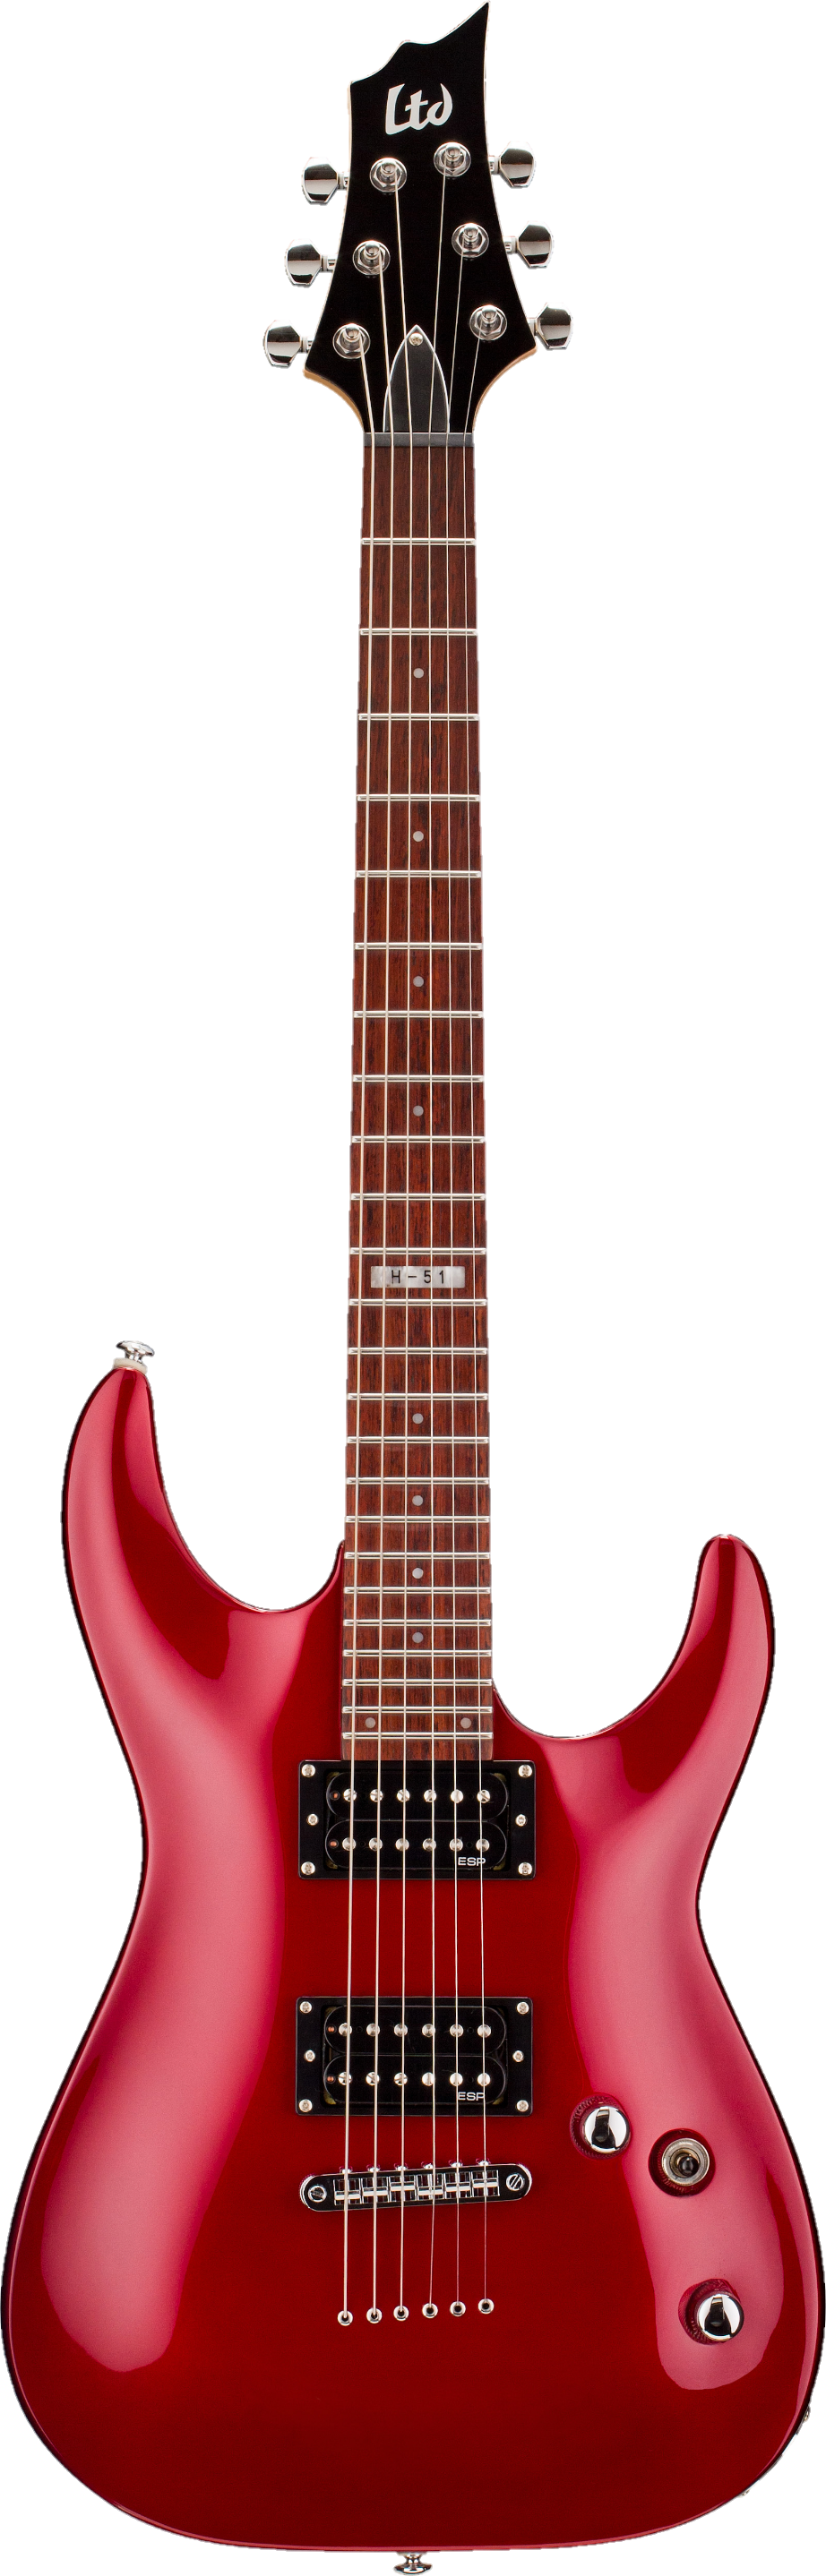 guitar-png-image-from-pngfre-33